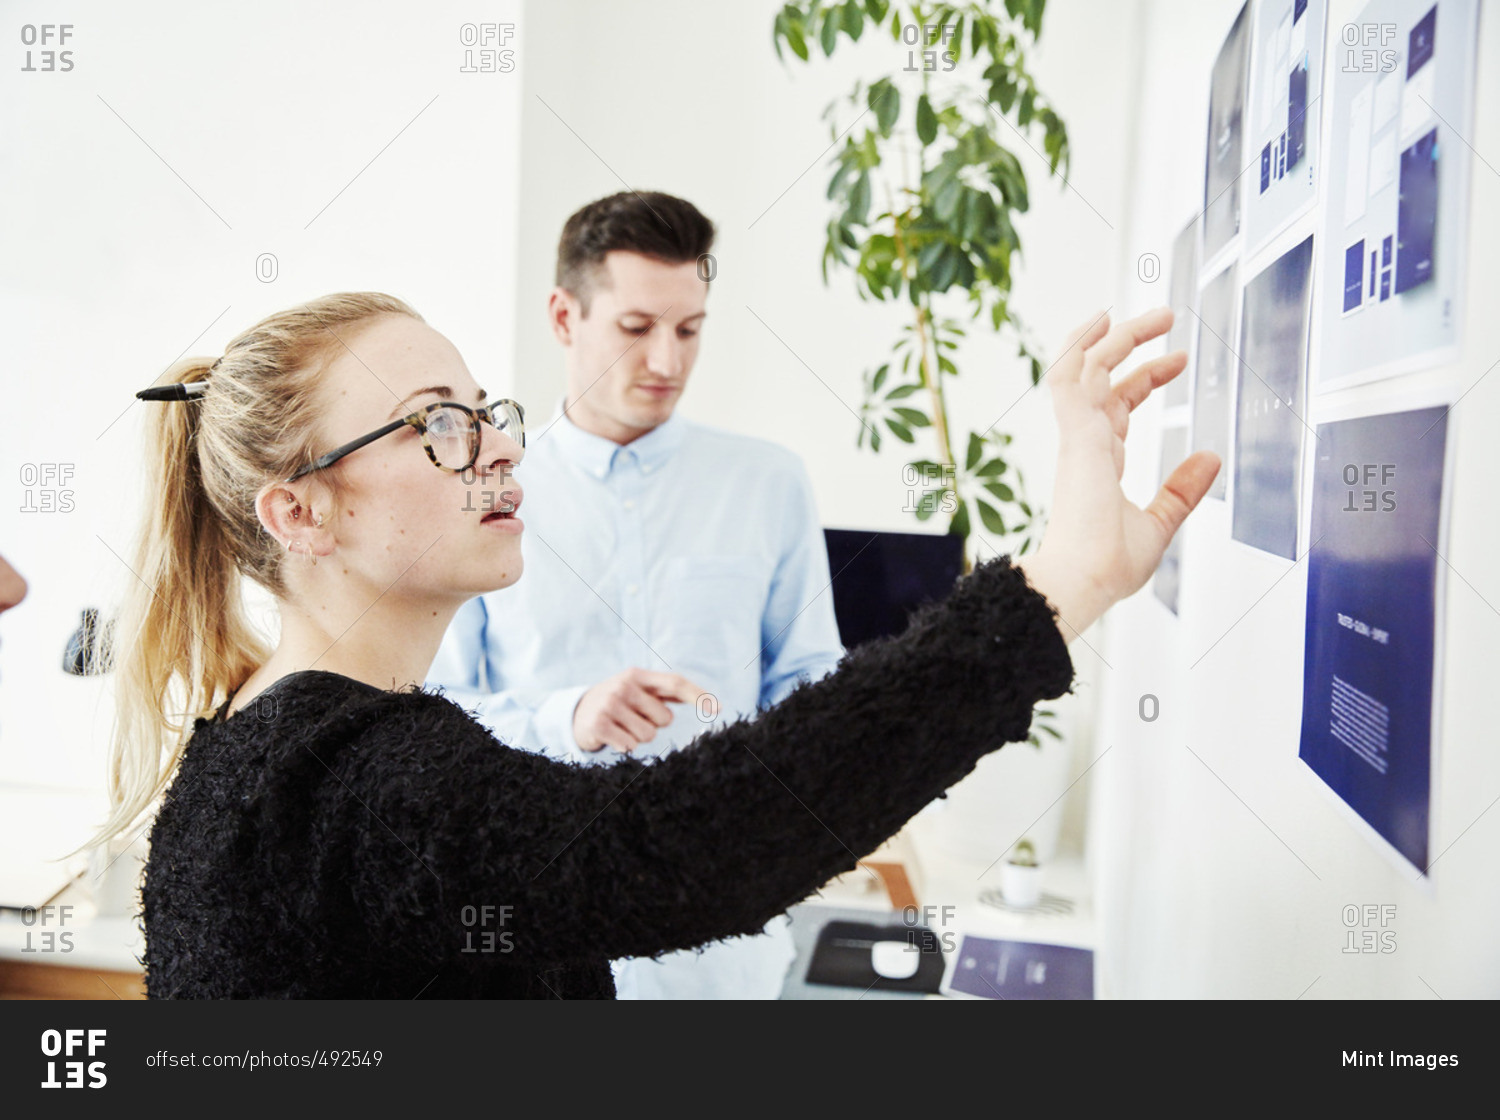 Two people looking at printed plans stuck on a wall, project management and discussions.